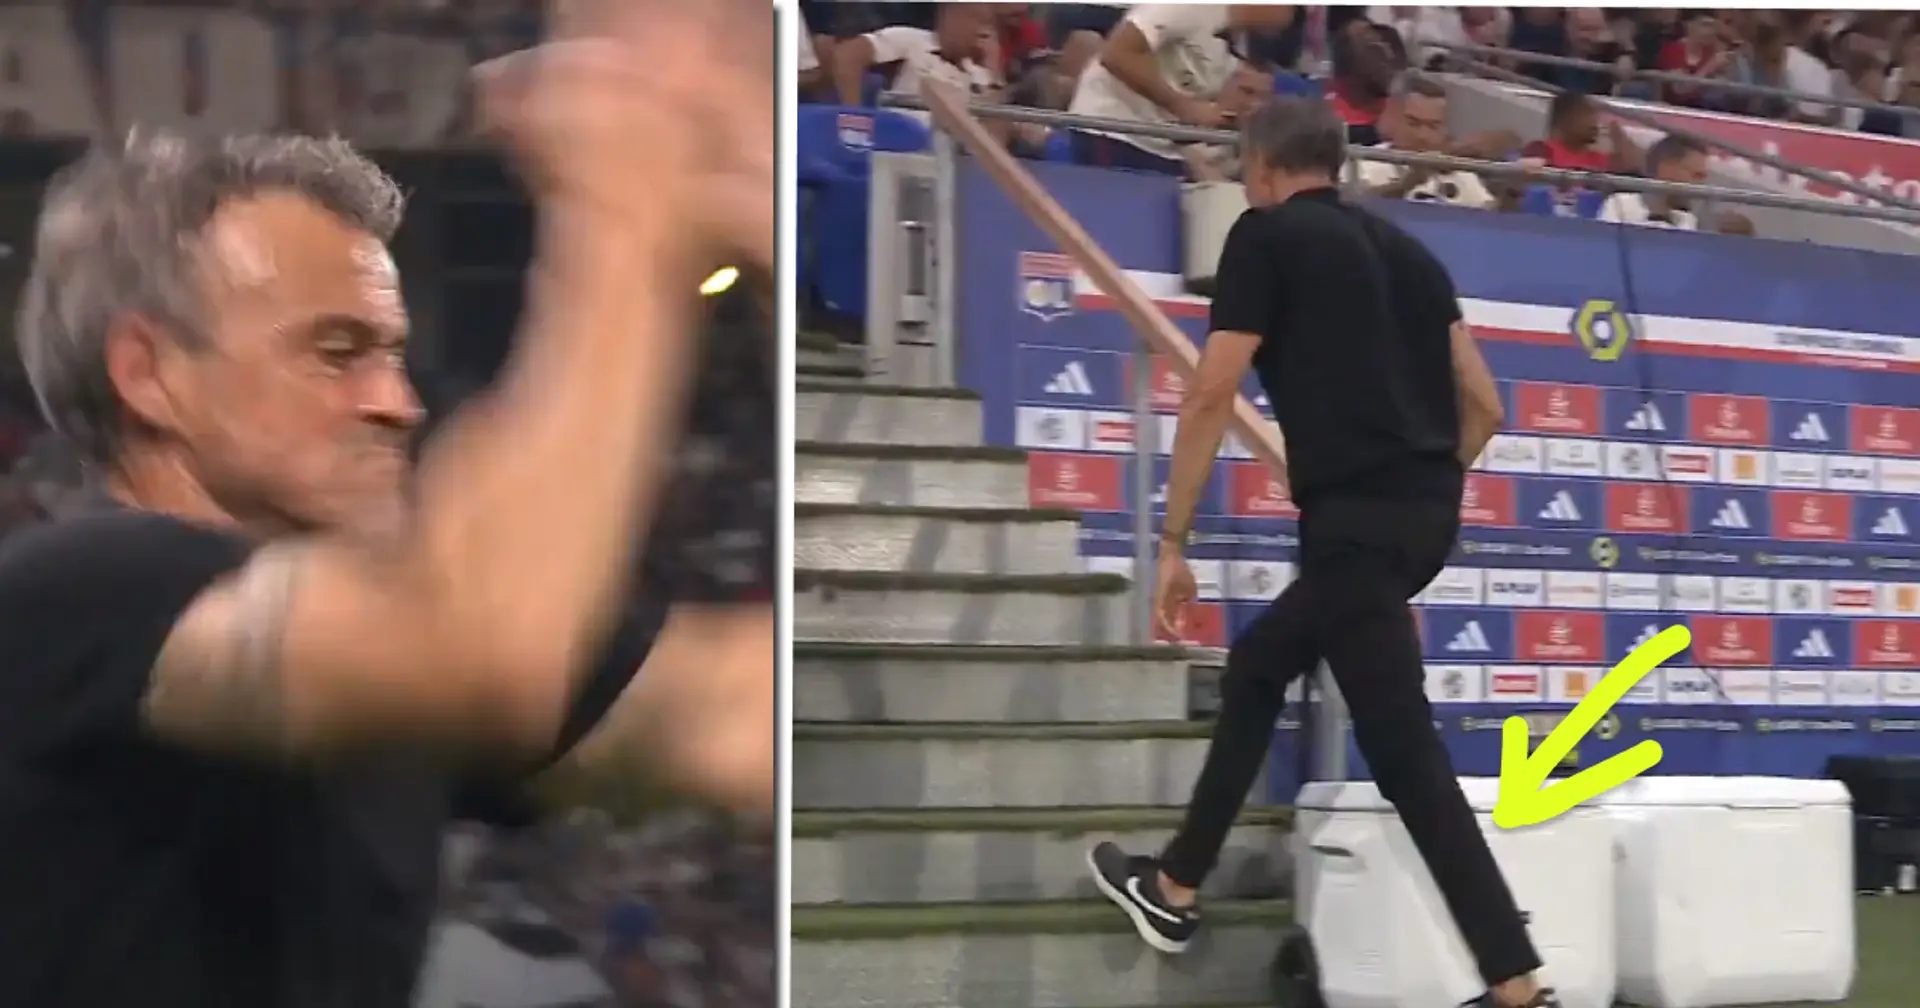 Spotted: Furious Luis Enrique violates stadium in reaction to Donnarumma starting PSG goal in wrong way